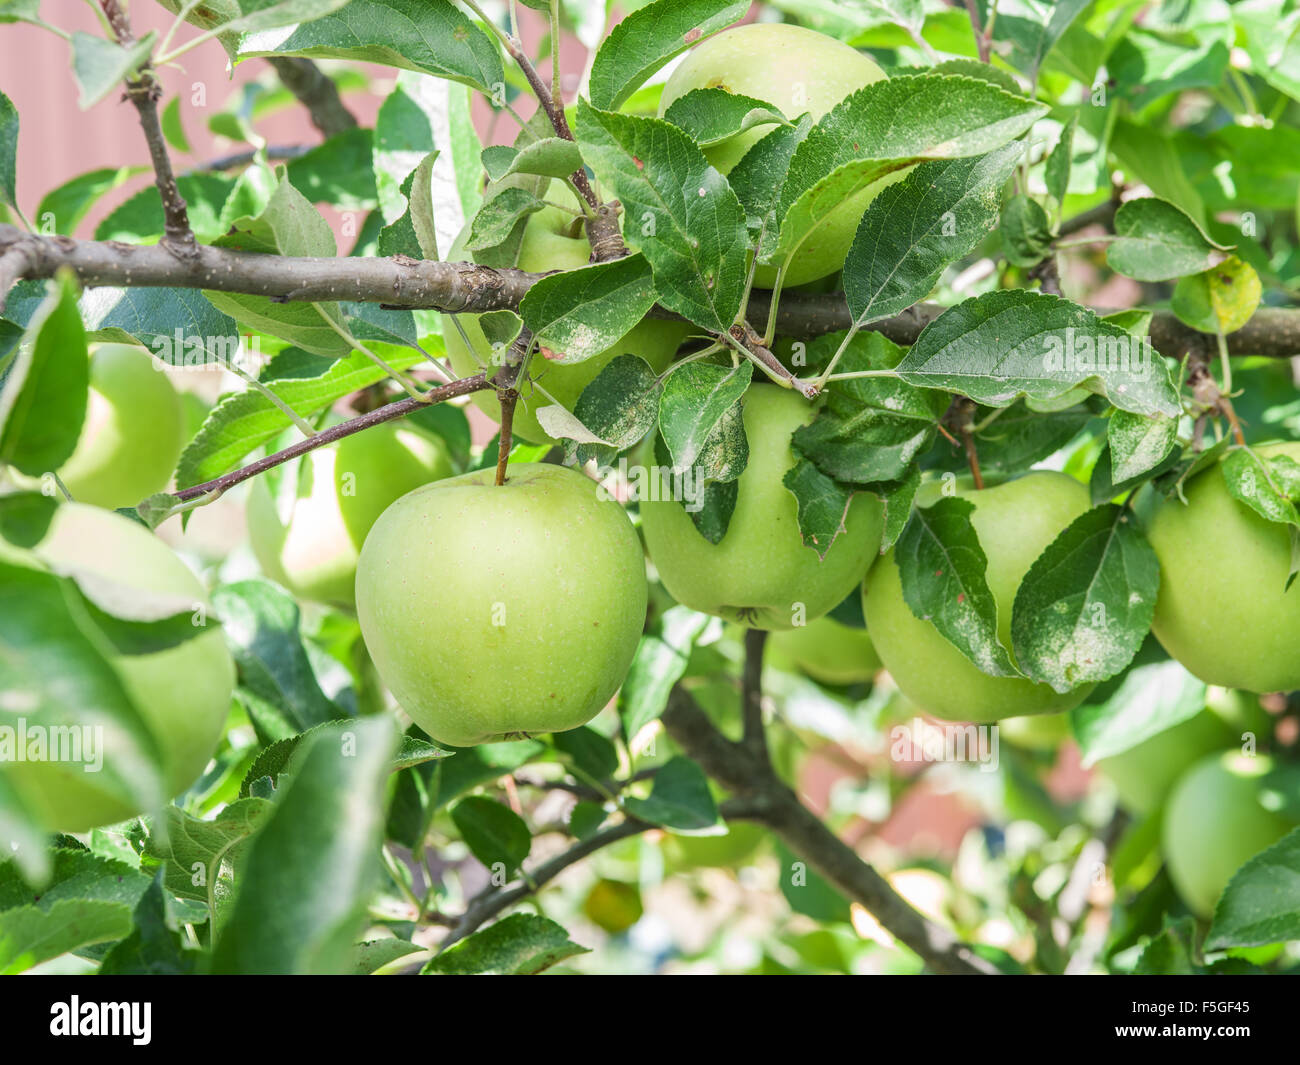 Ripe Golden Delicious apples on the tree. Closeup shot. Stock Photo